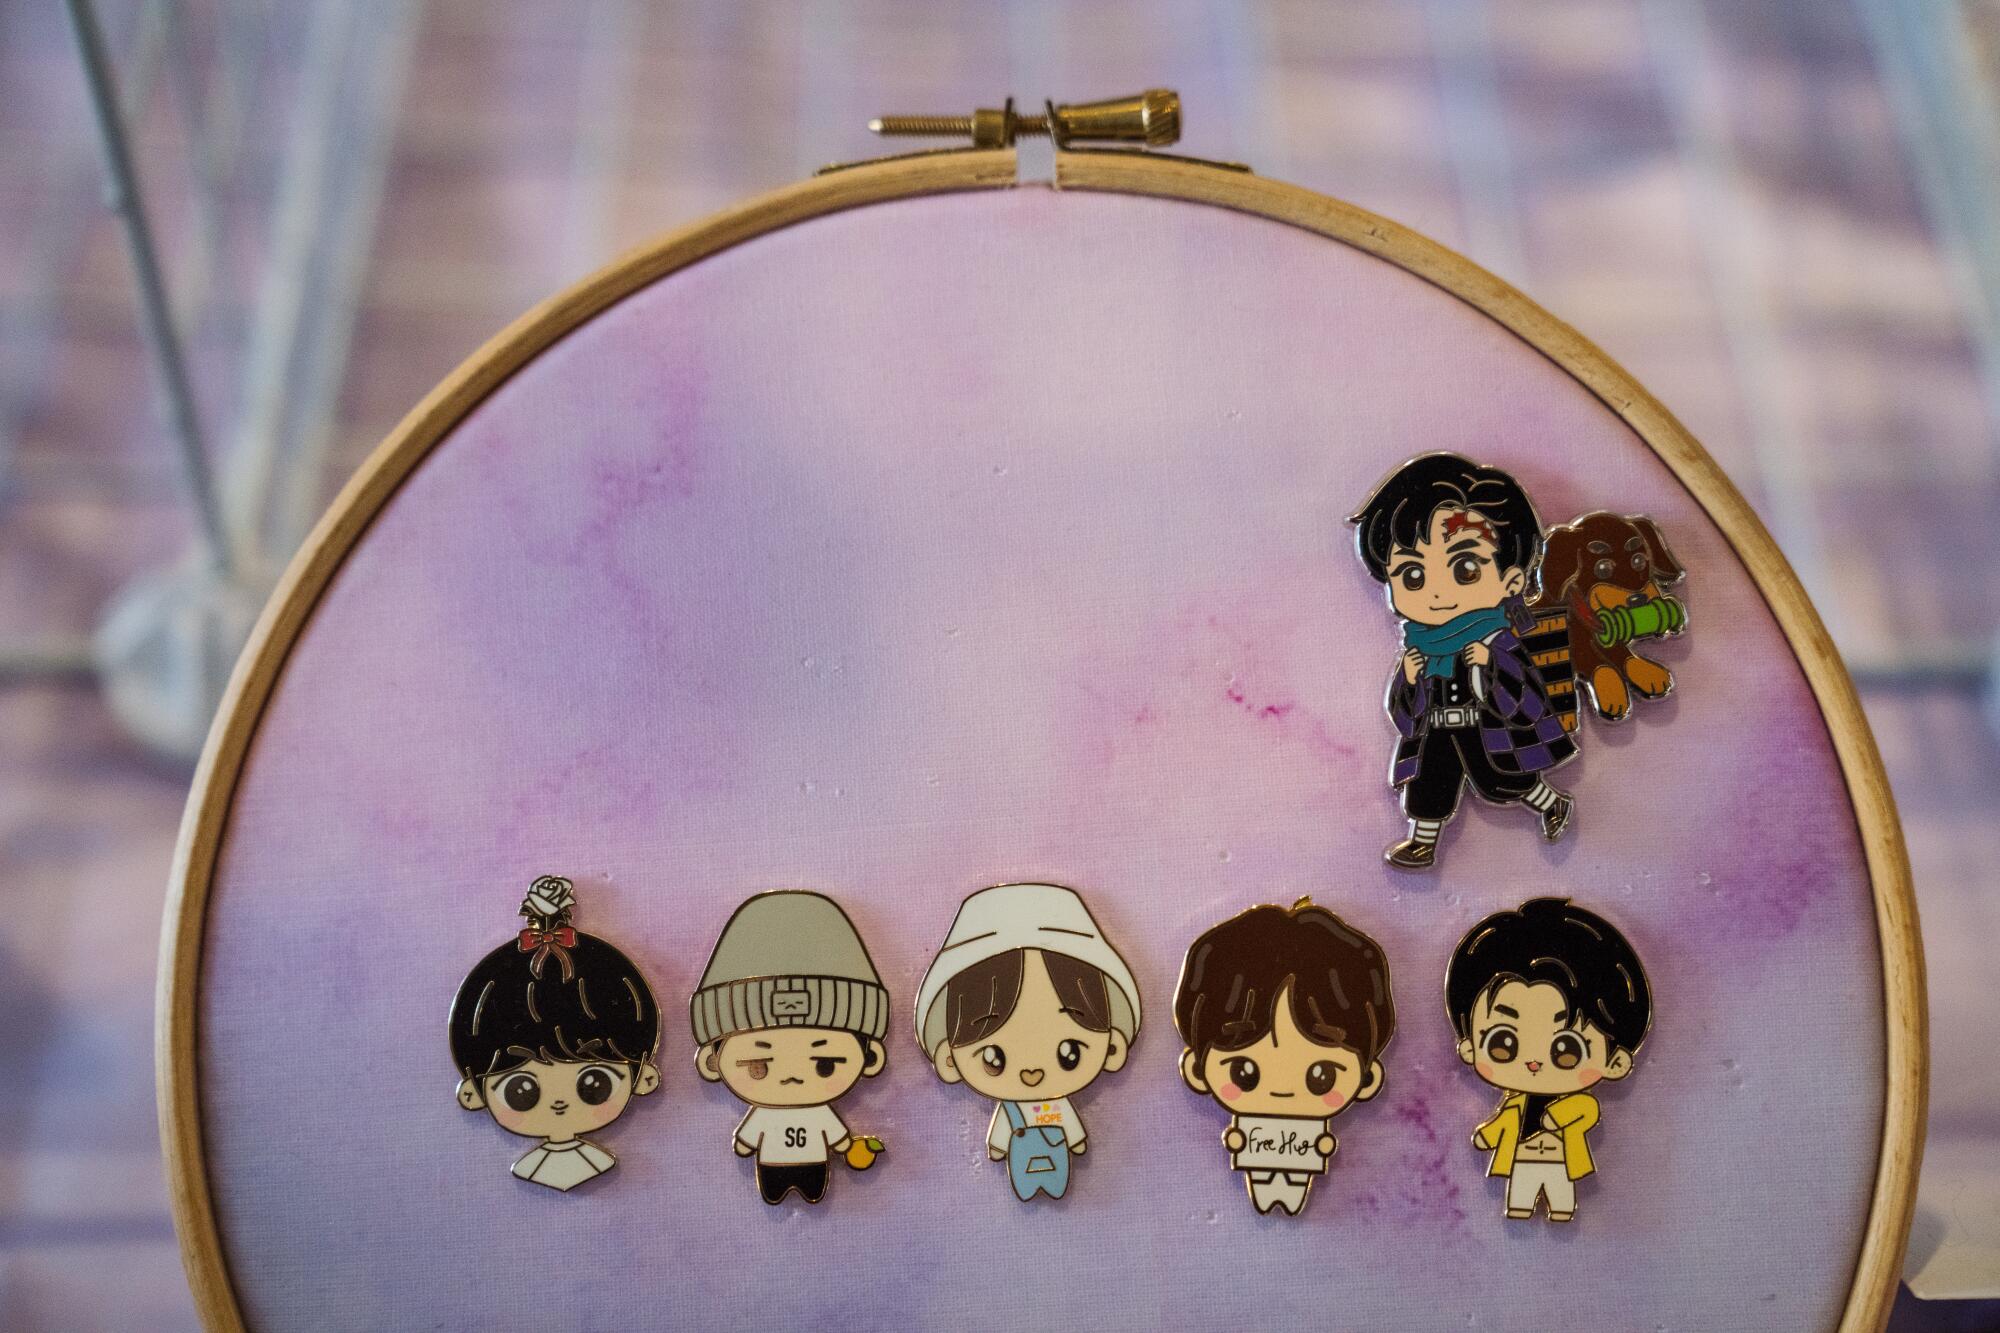 A needlework frame holds fabric on which are displayed pins depicting K-pop artists